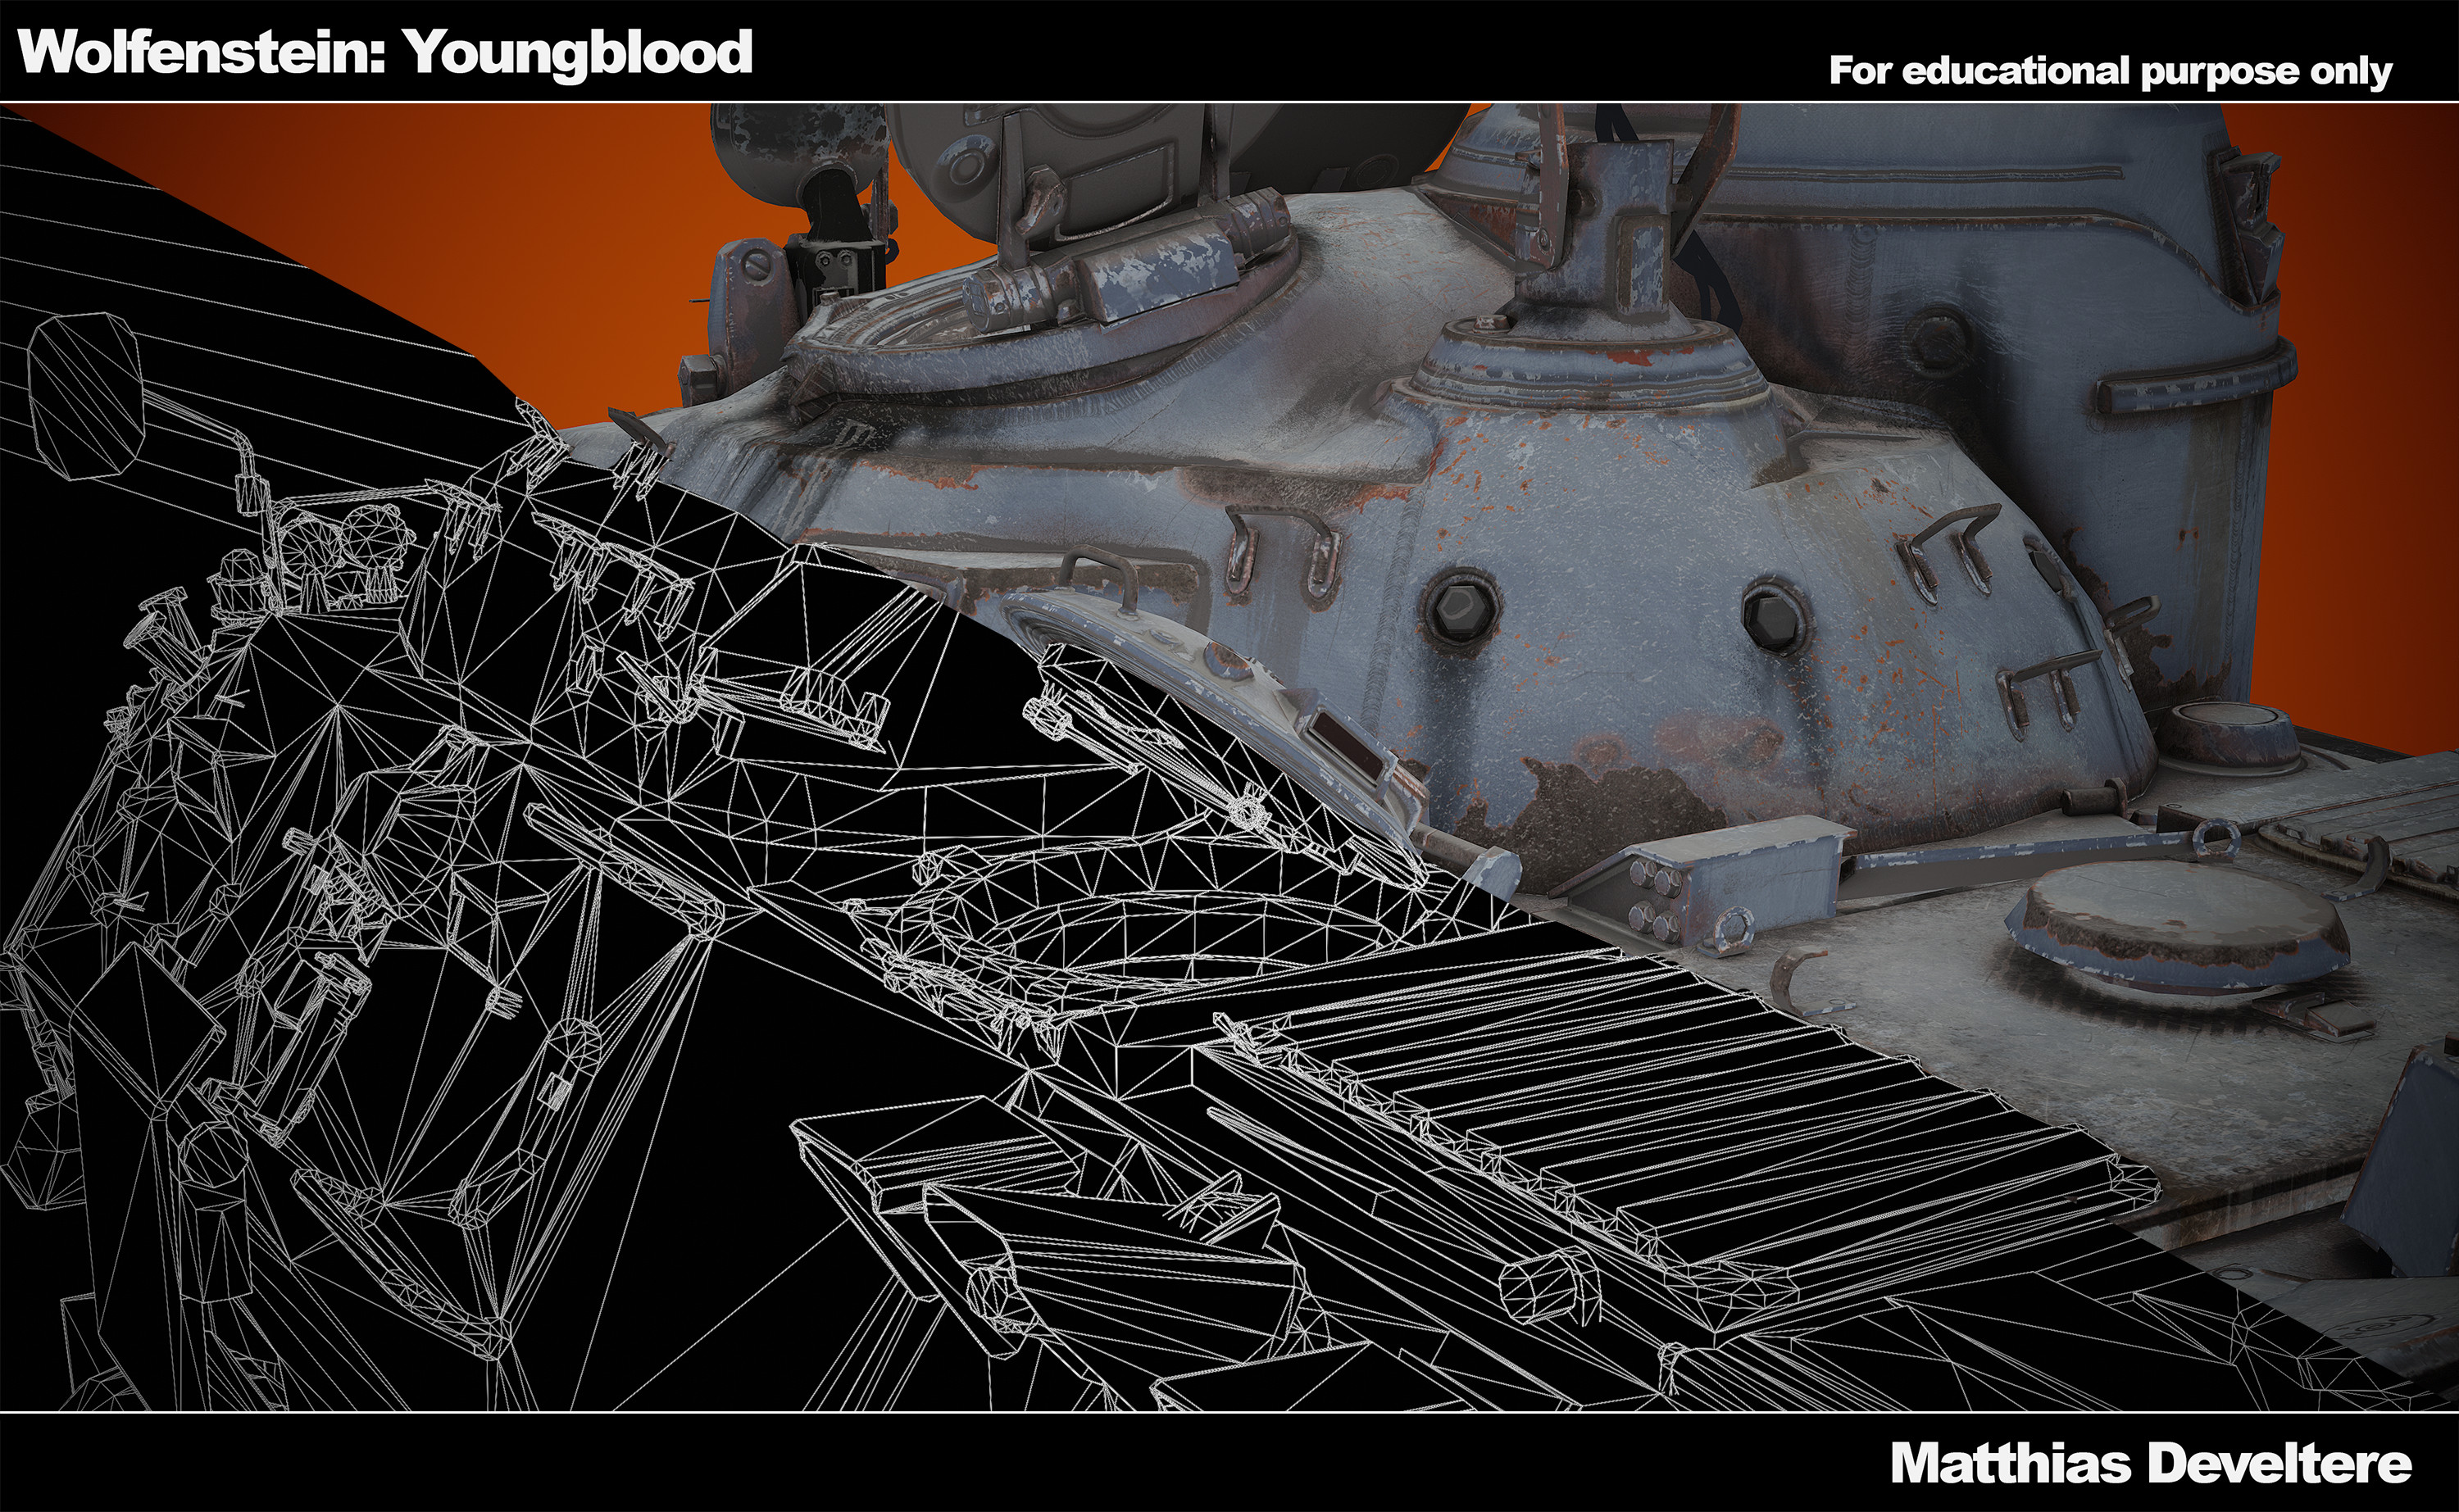 3D Pipeline done by Matthias Develtere
Texturing done by Ayi Sanchez